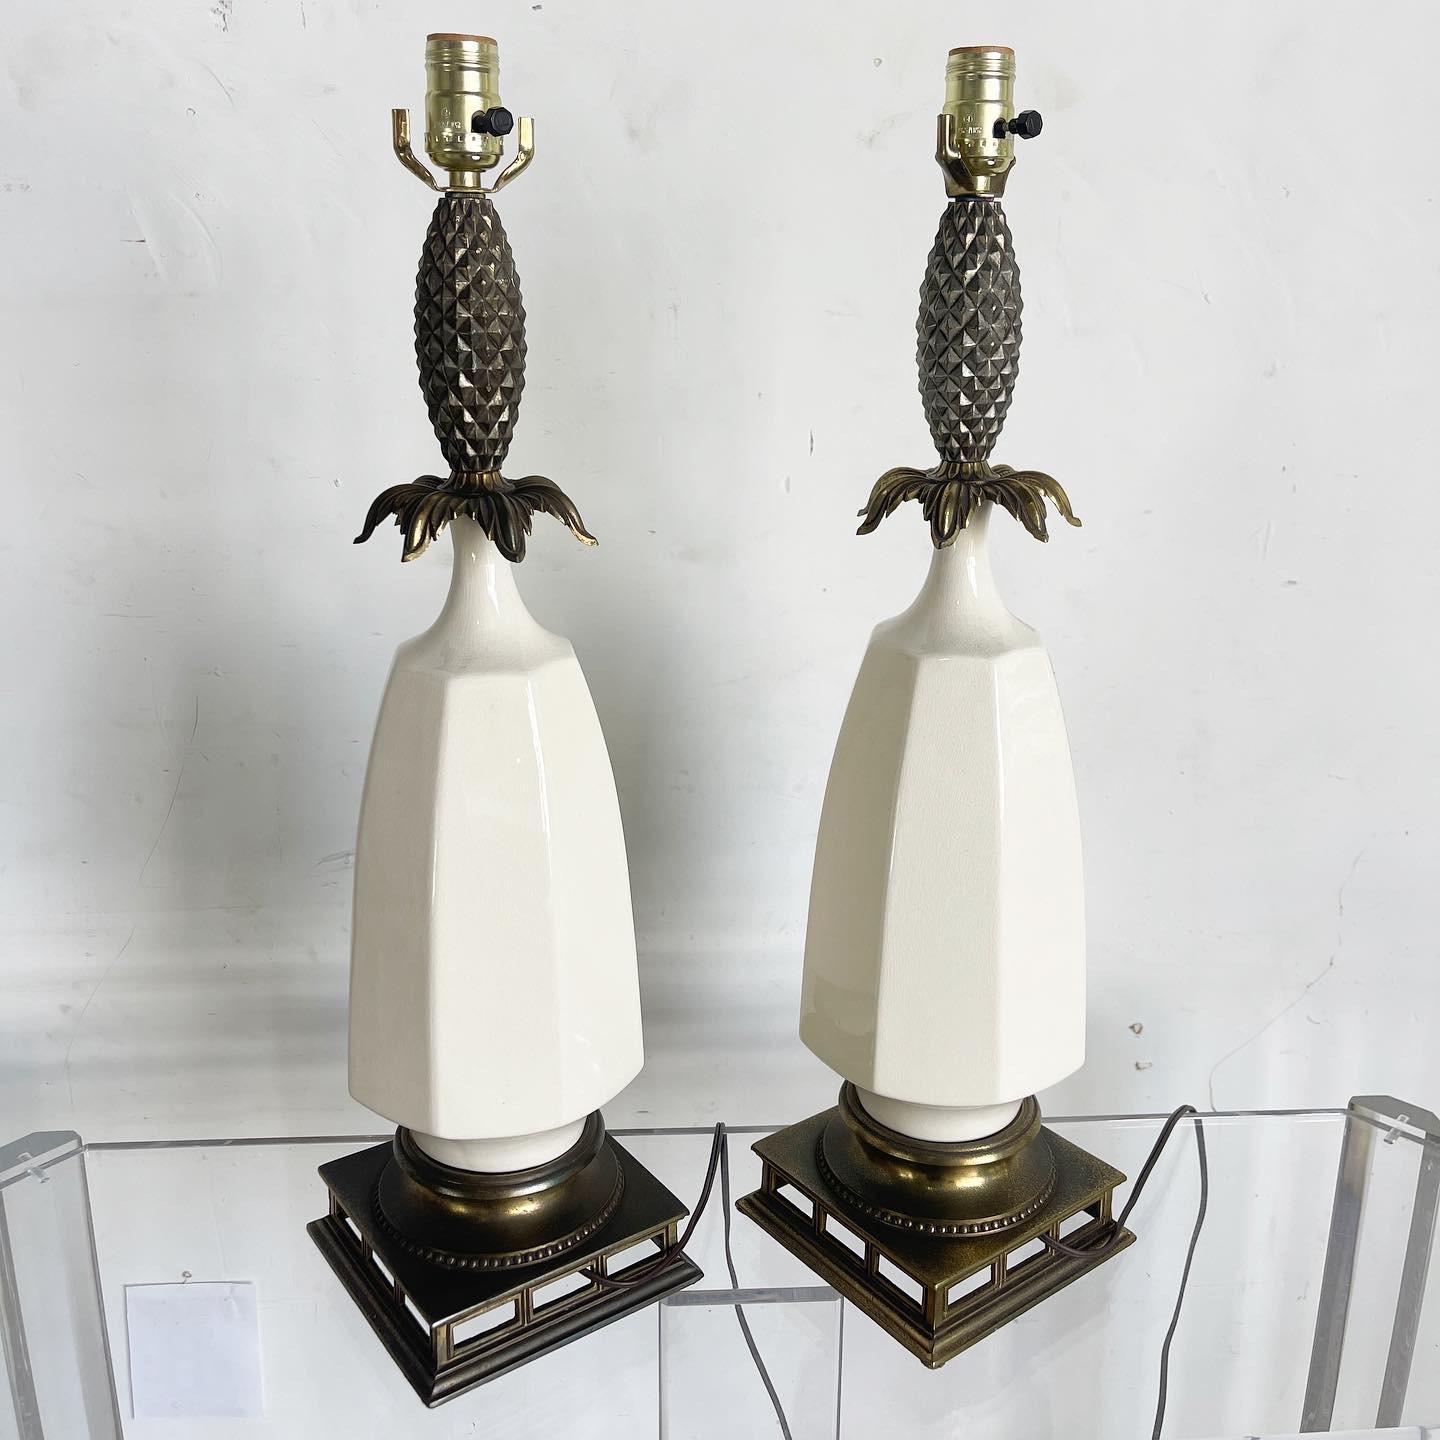 Hollywood Regency Creams Ceramic and Brass Pineapple Table Lamps - a Pair For Sale 1